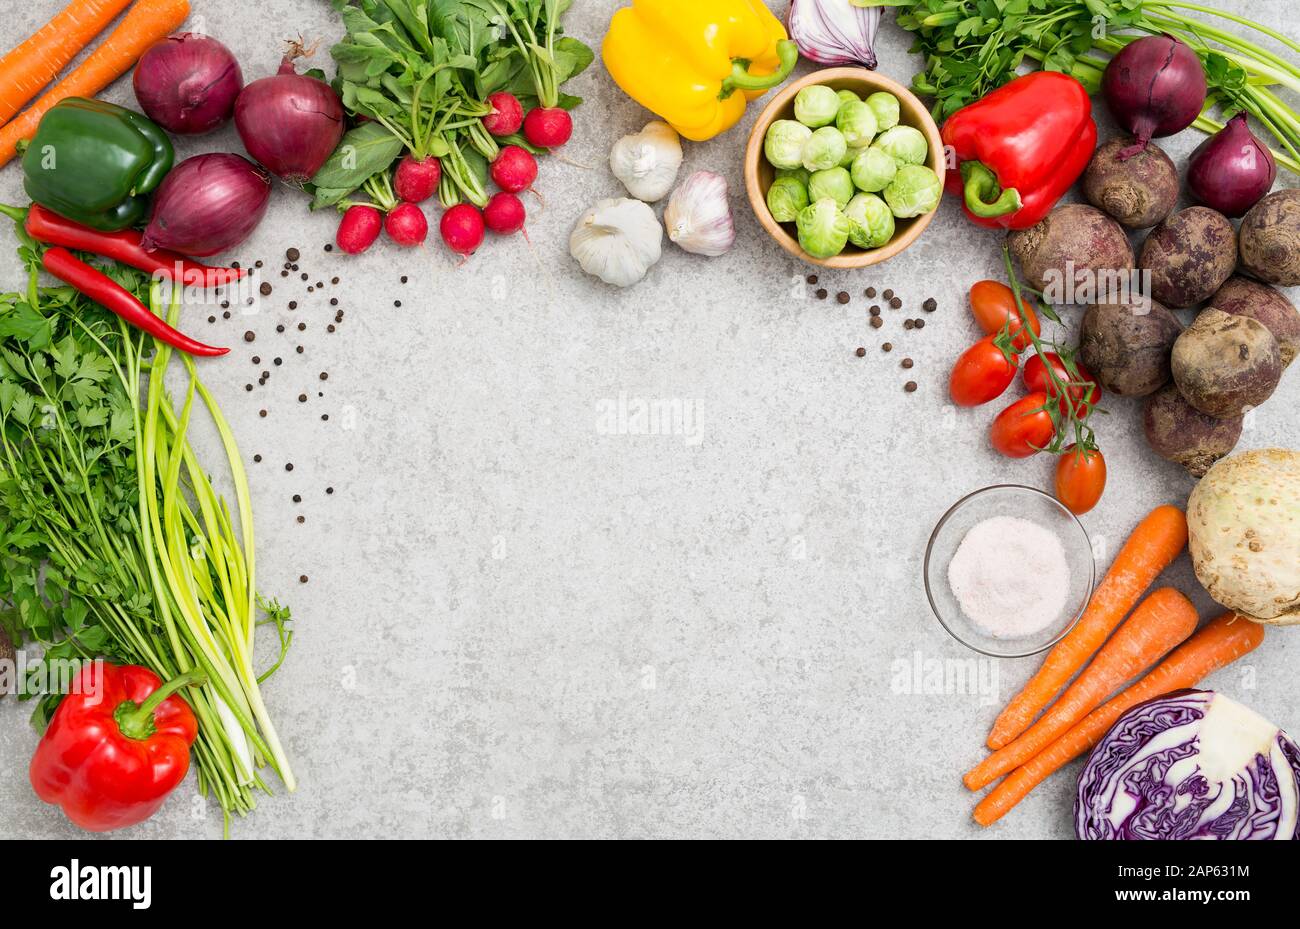 food background cooking ingredient kitchen concept meal vegetarian vegetable health top view space board table blank brown concept - stock image Stock Photo